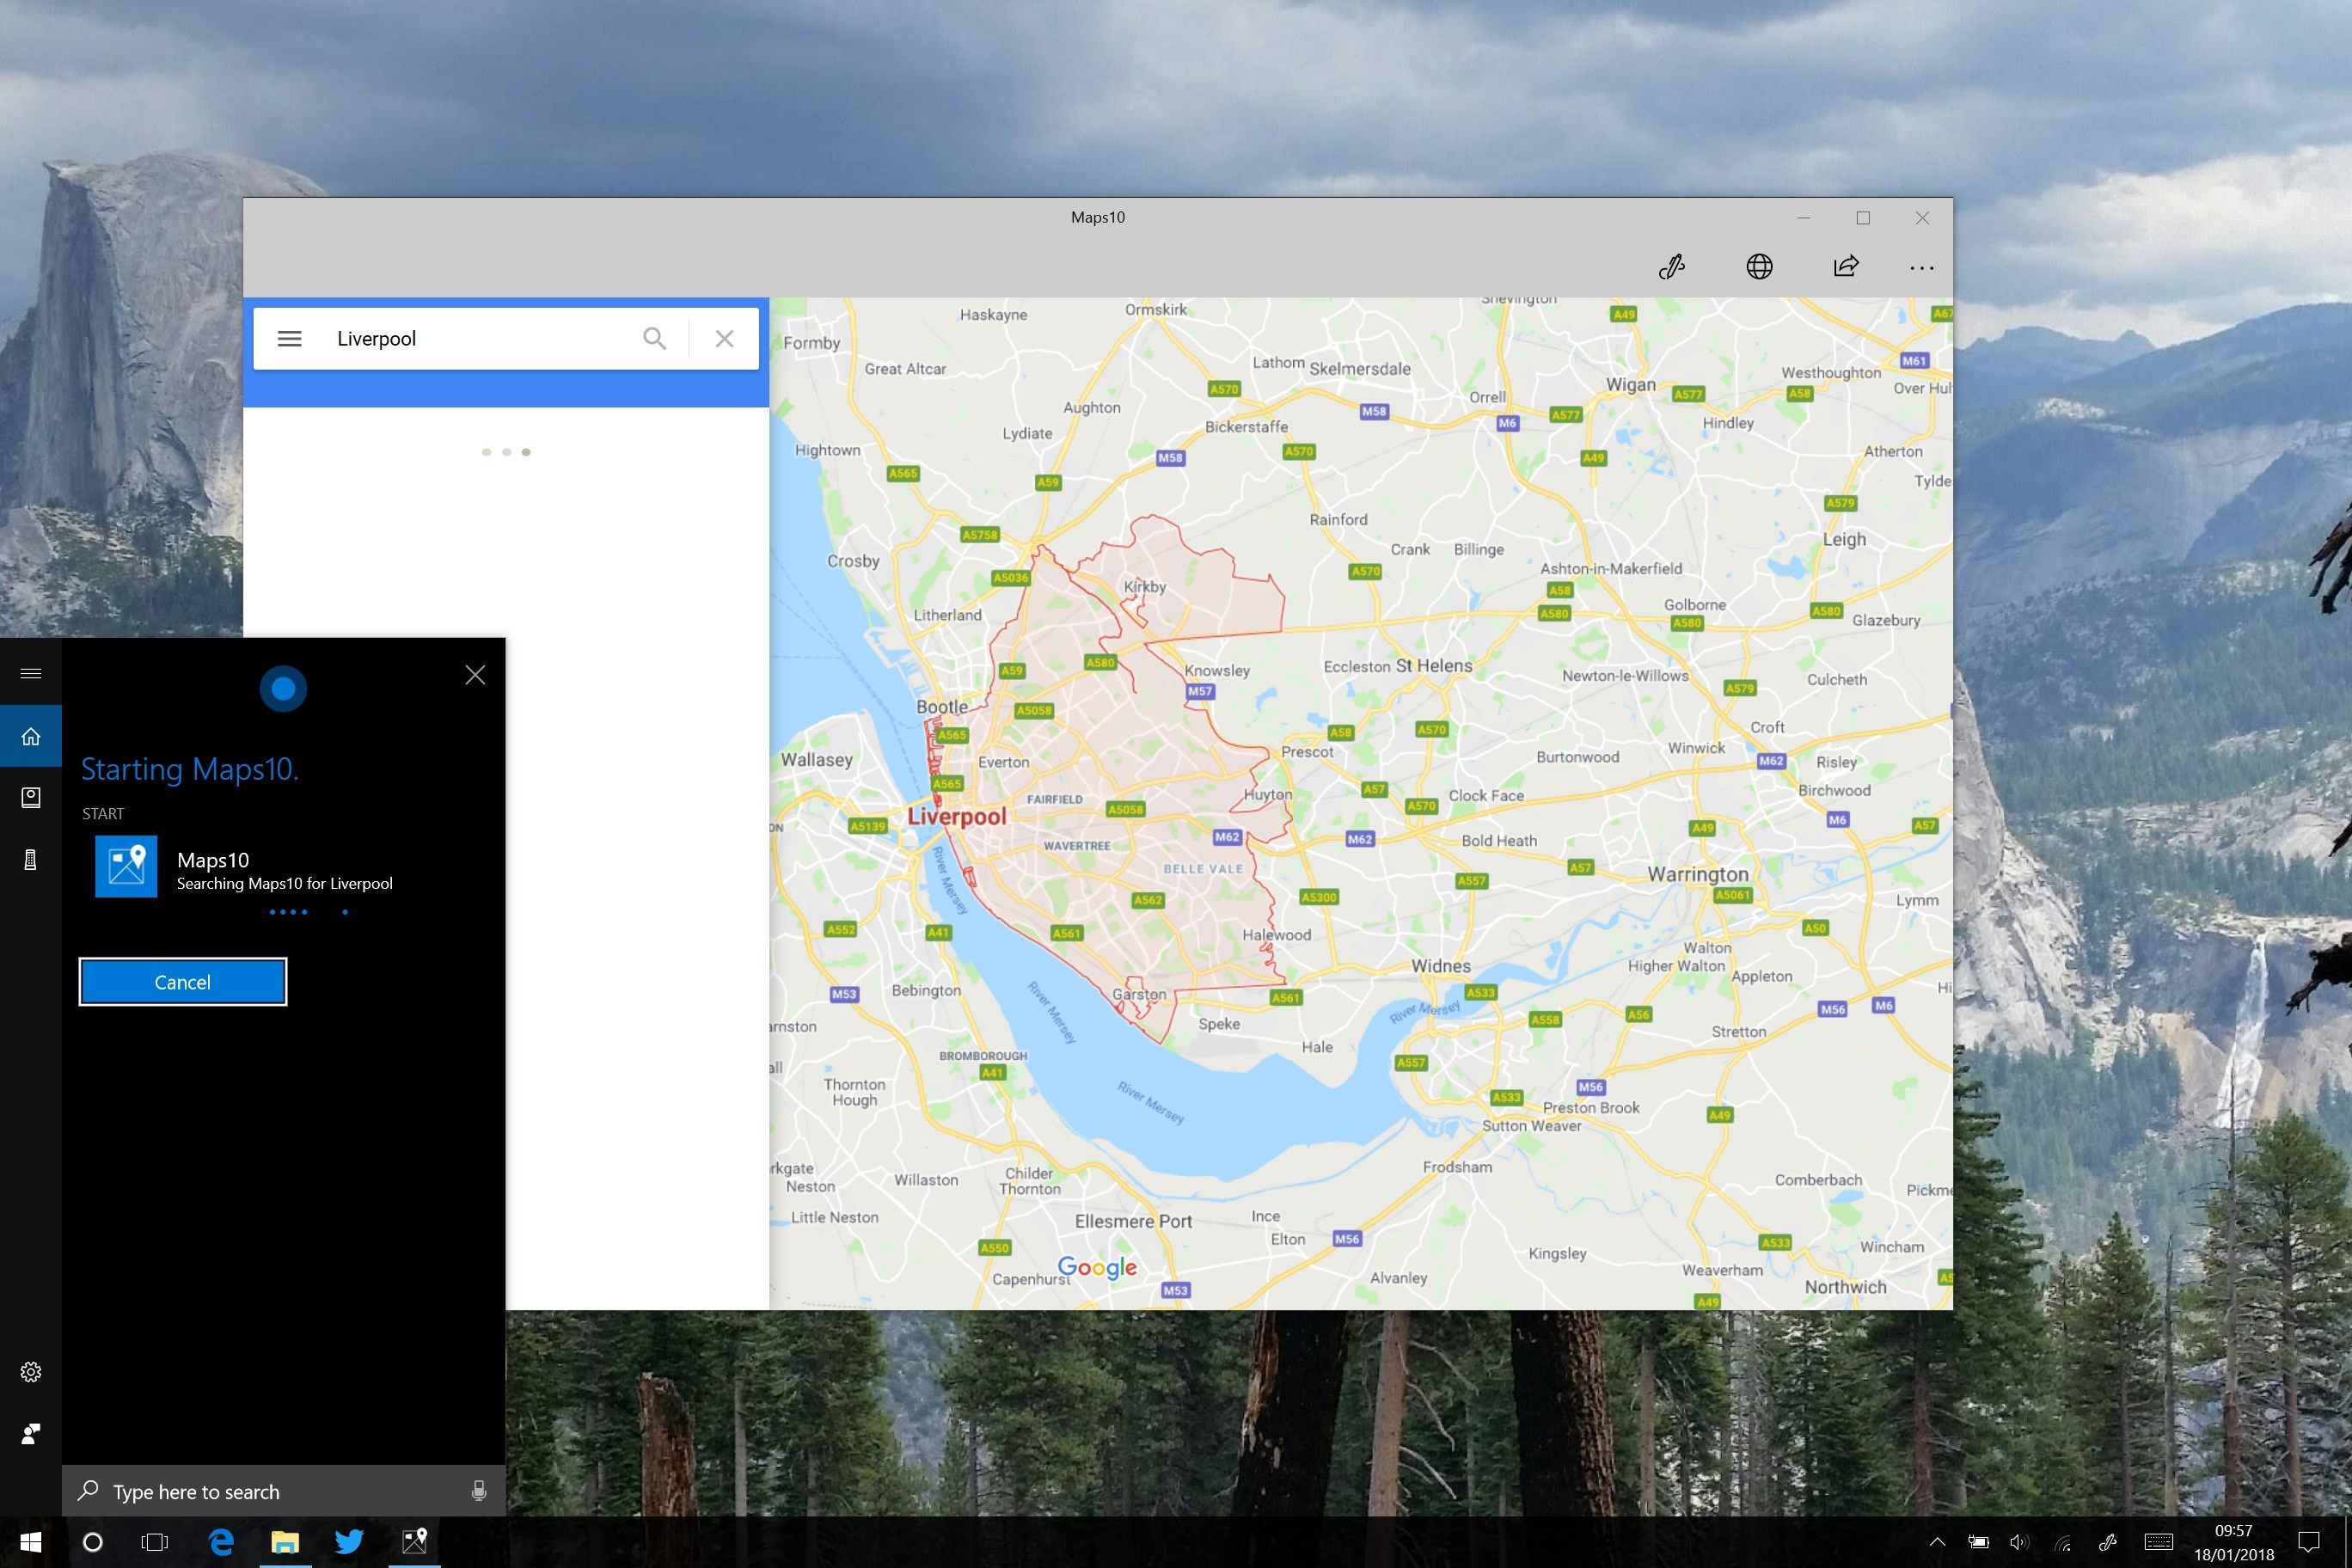 "Hey Cortana, search Maps10 for Liverpool"
 Note: Maps10 must be already running for Cortana integration to work properly